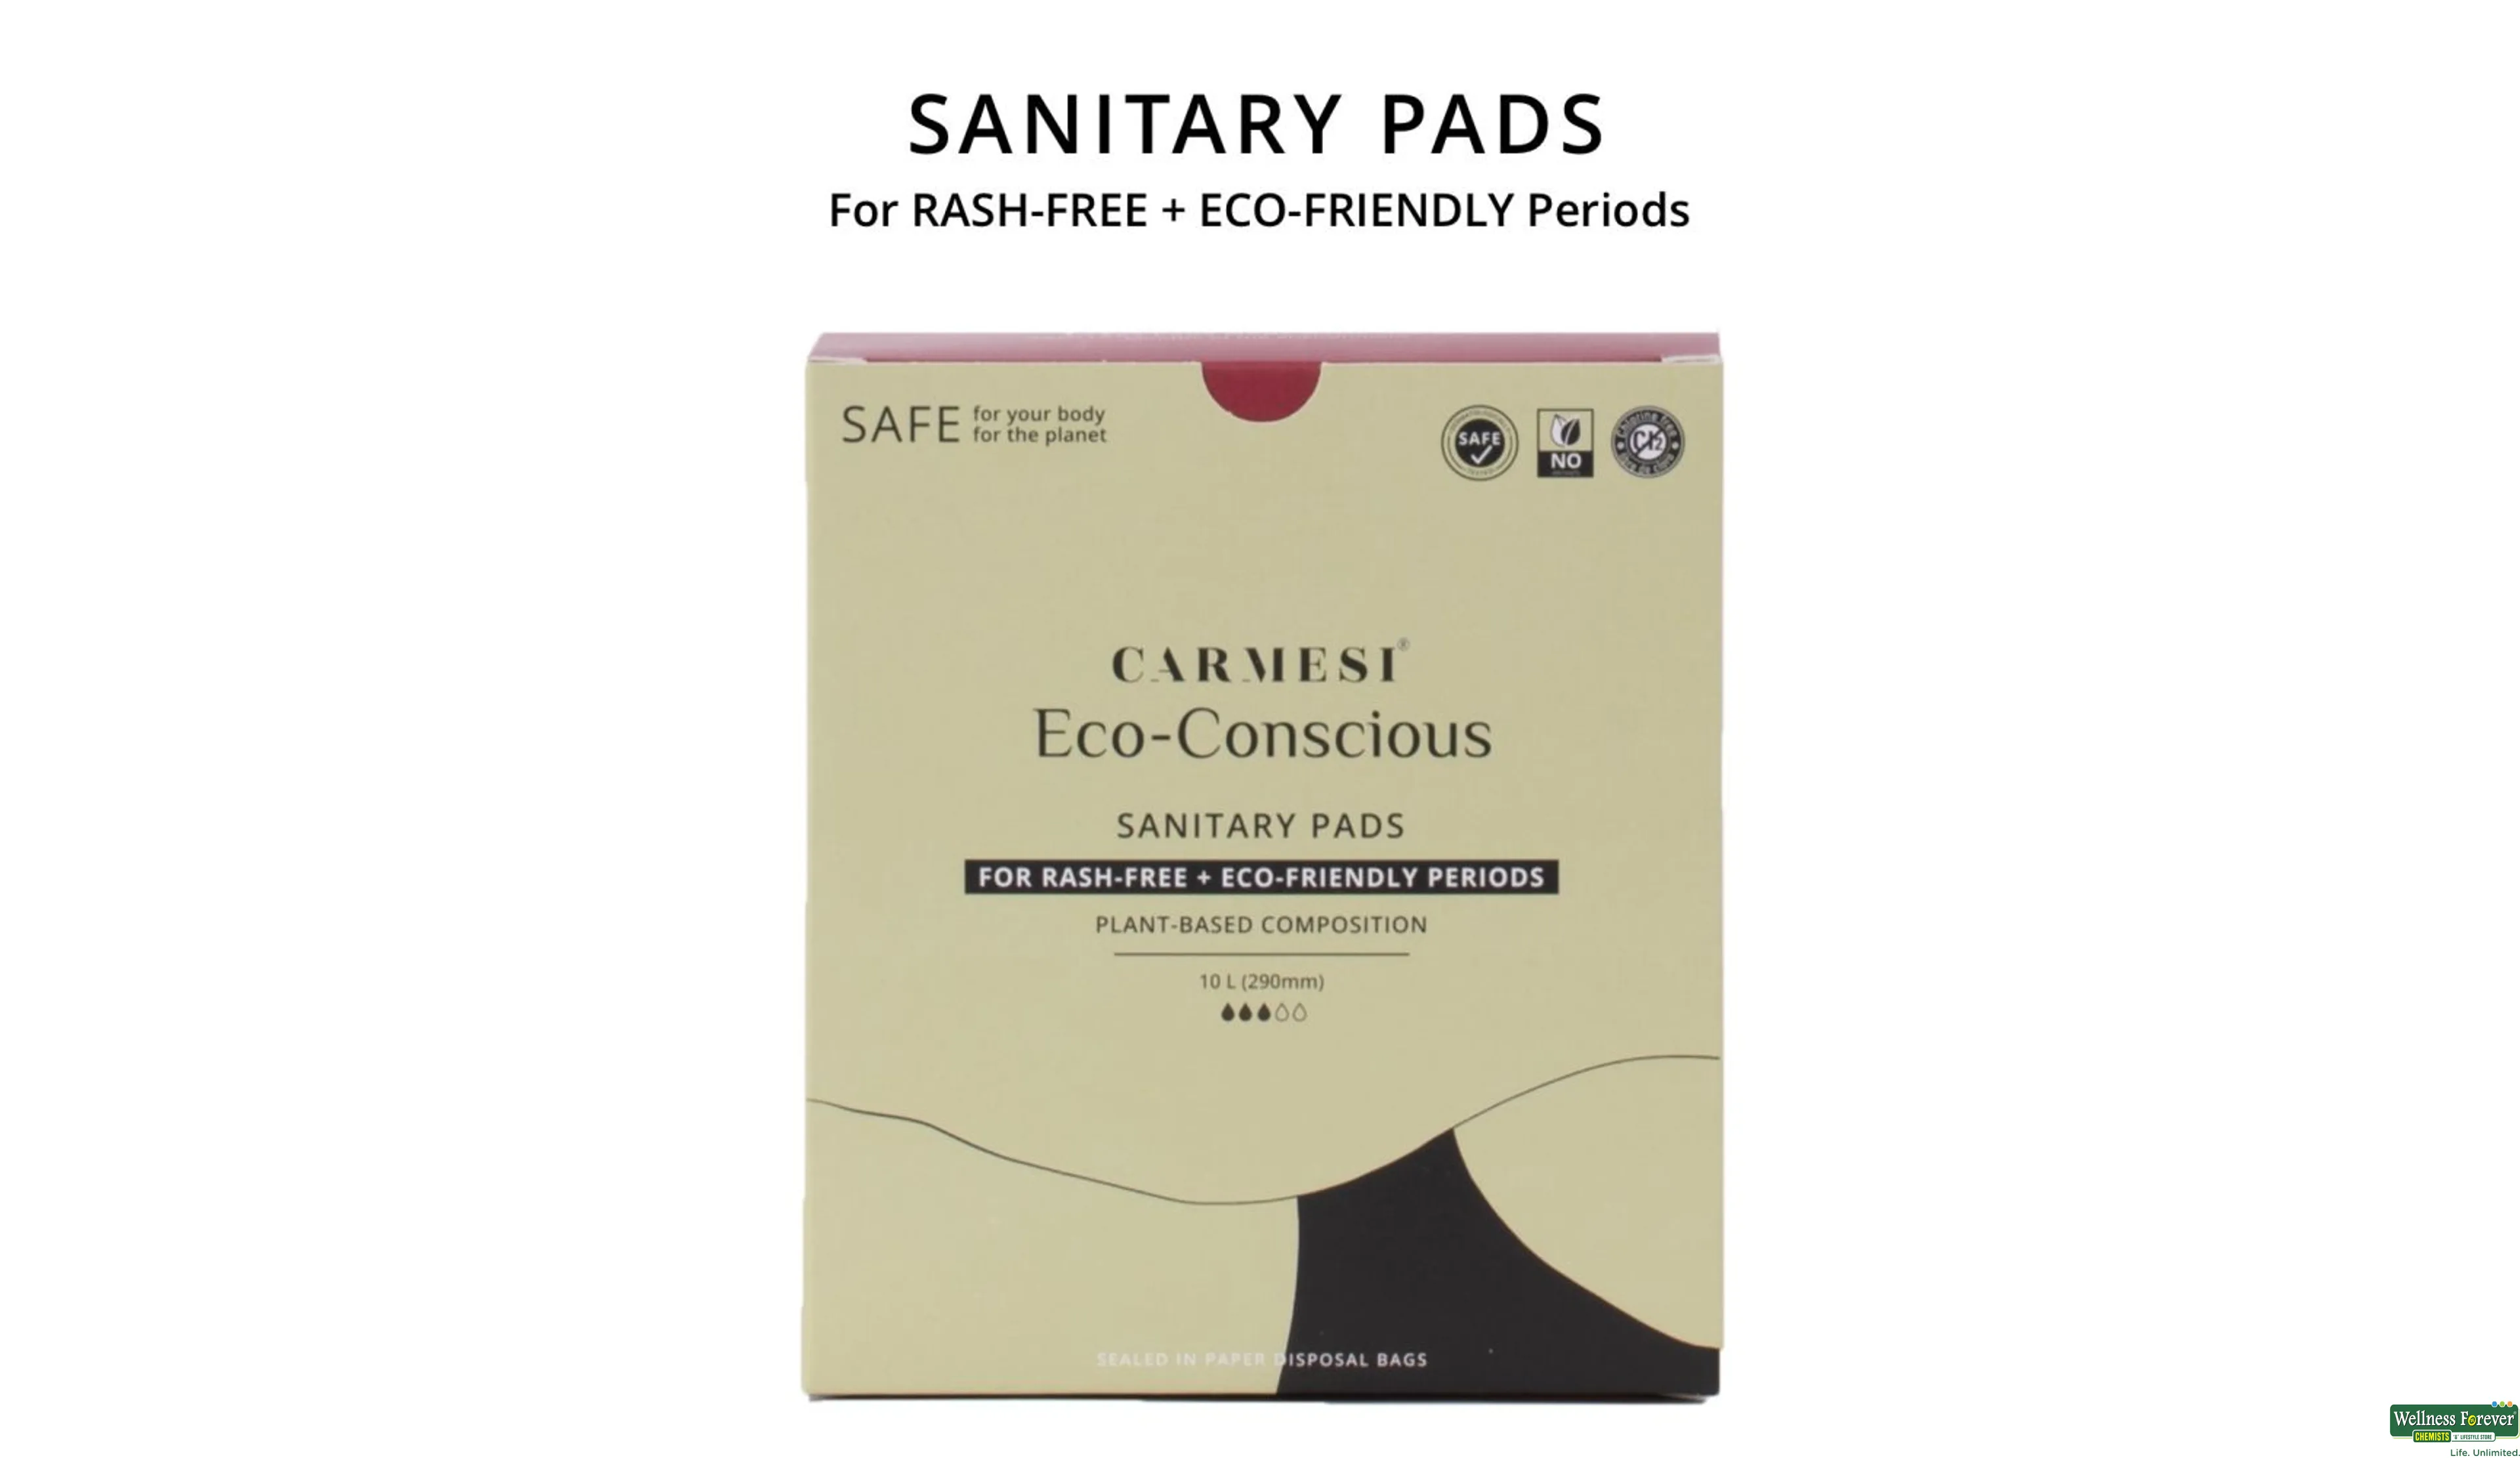 Buy Pee Safe Biodegradable Sanitary Pads, Overnight, 10 pcs Online at Best  Prices